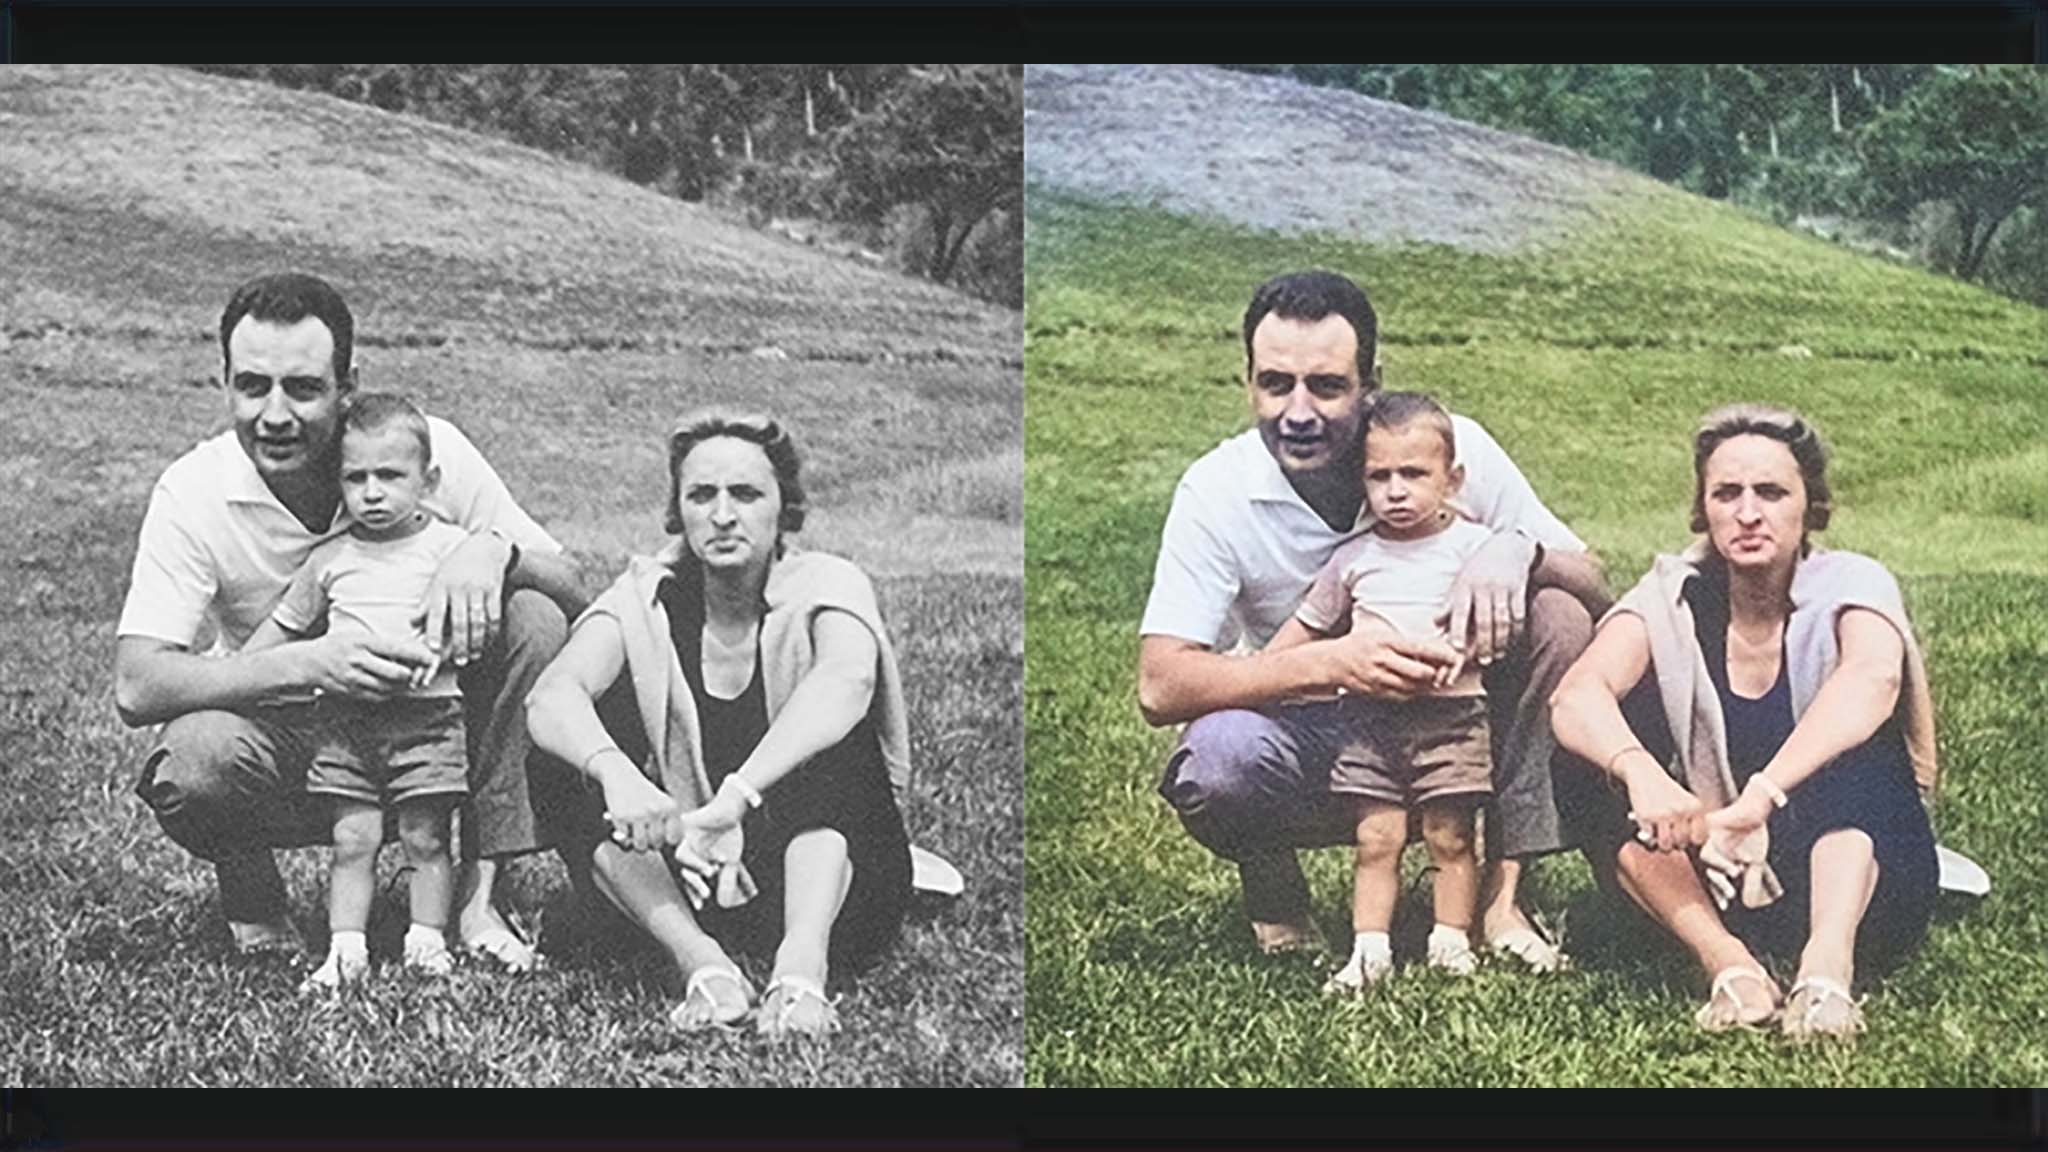 Adobe Photoshop AI tools can allow you to colorize old black and white family photos.